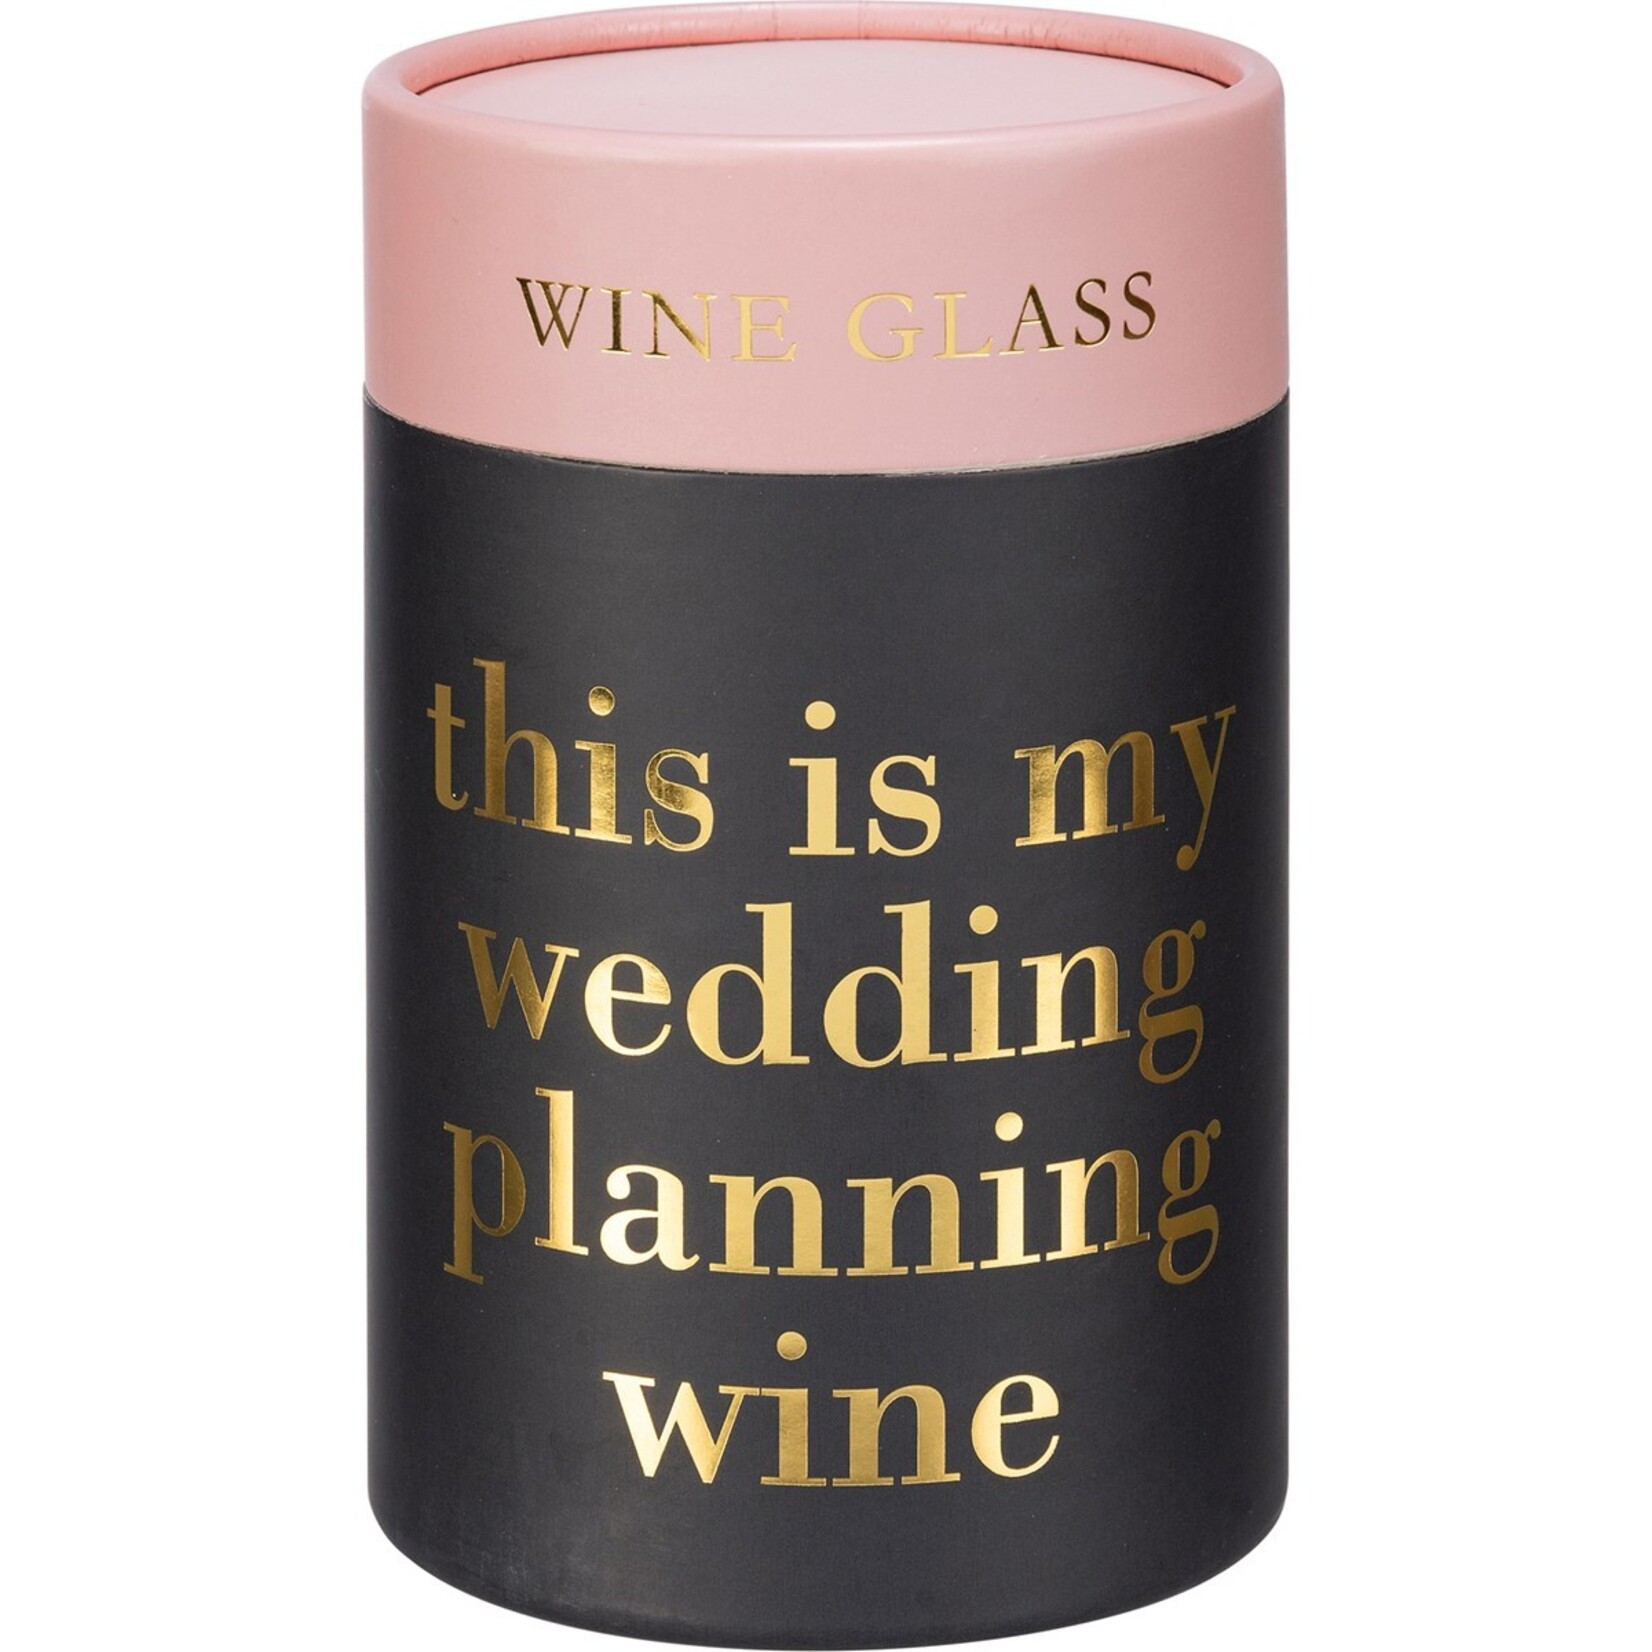 Primitives by Kathy Primitives by Kathy This Is My Wedding Planning Wine Wine Glass